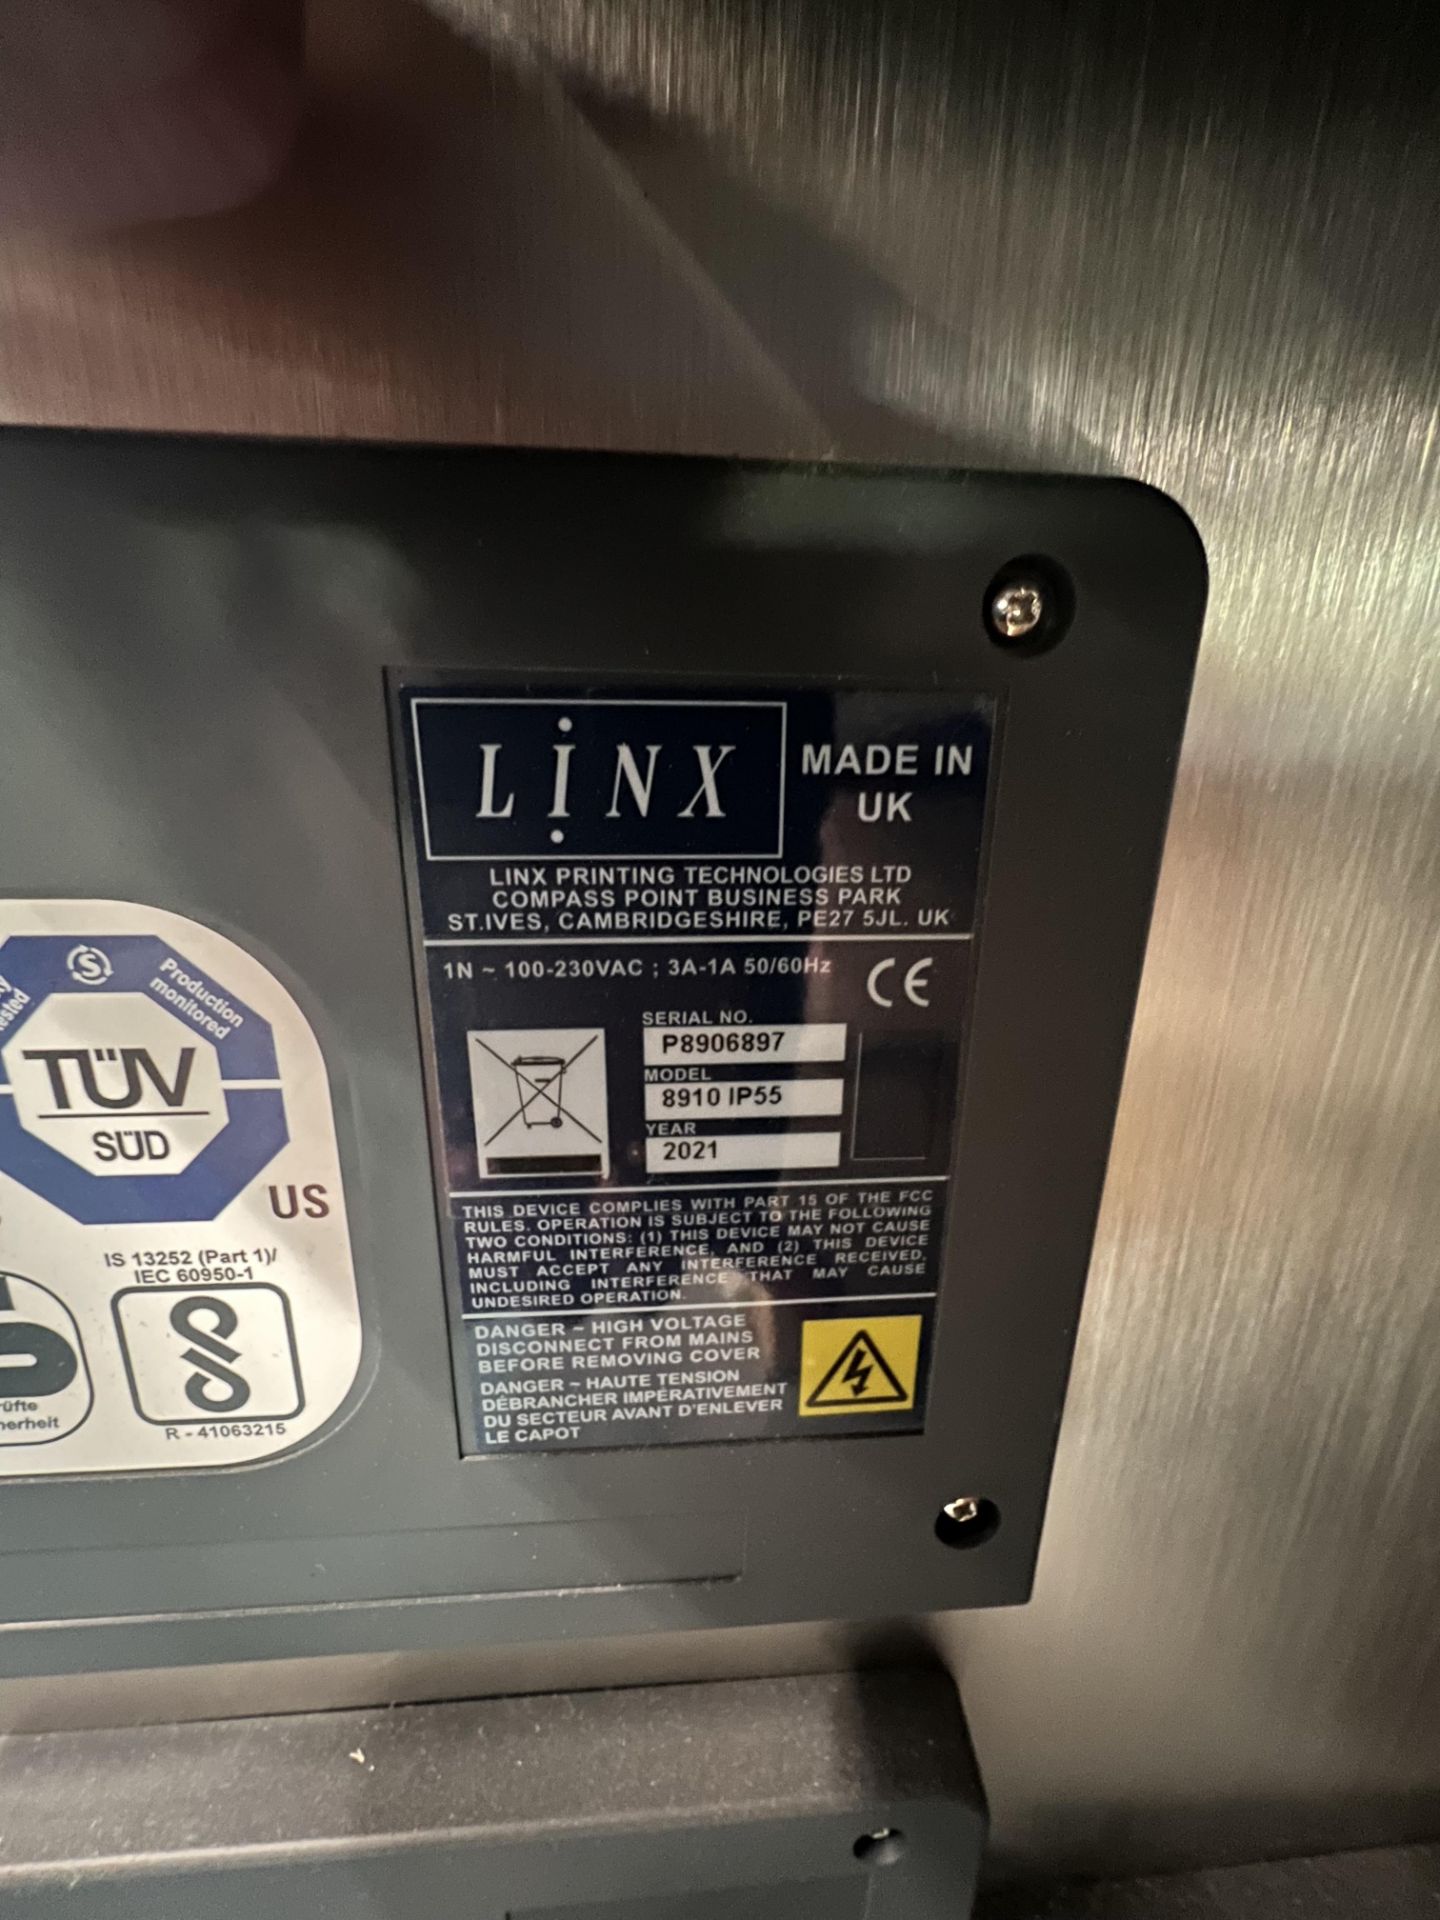 20221 LINX SINGLE HEAD DATE CODER, MODEL 8910 IP55, S/N P8906897, NEW / NEVER INSTALLED - Image 3 of 4